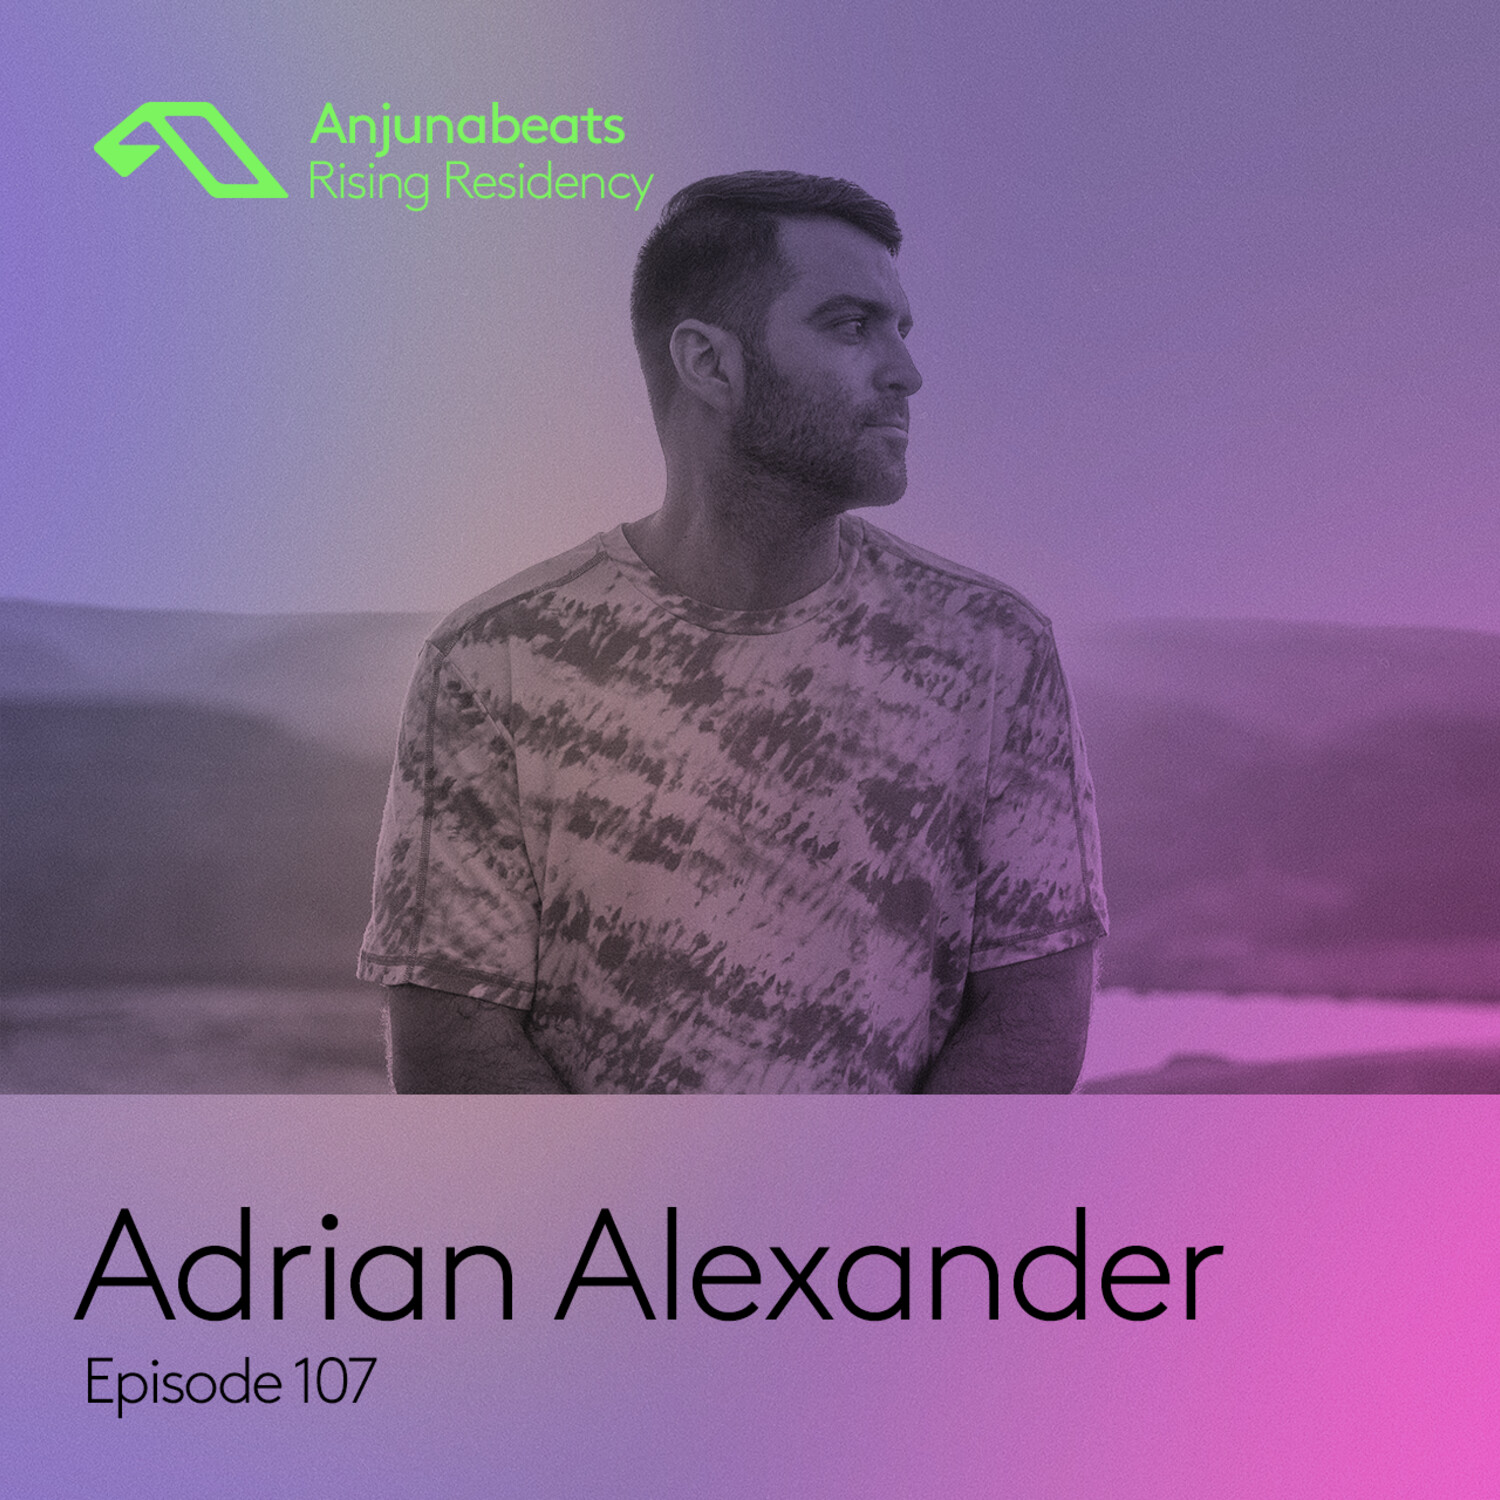 The Anjunabeats Rising Residency 107 with Adrian Alexander